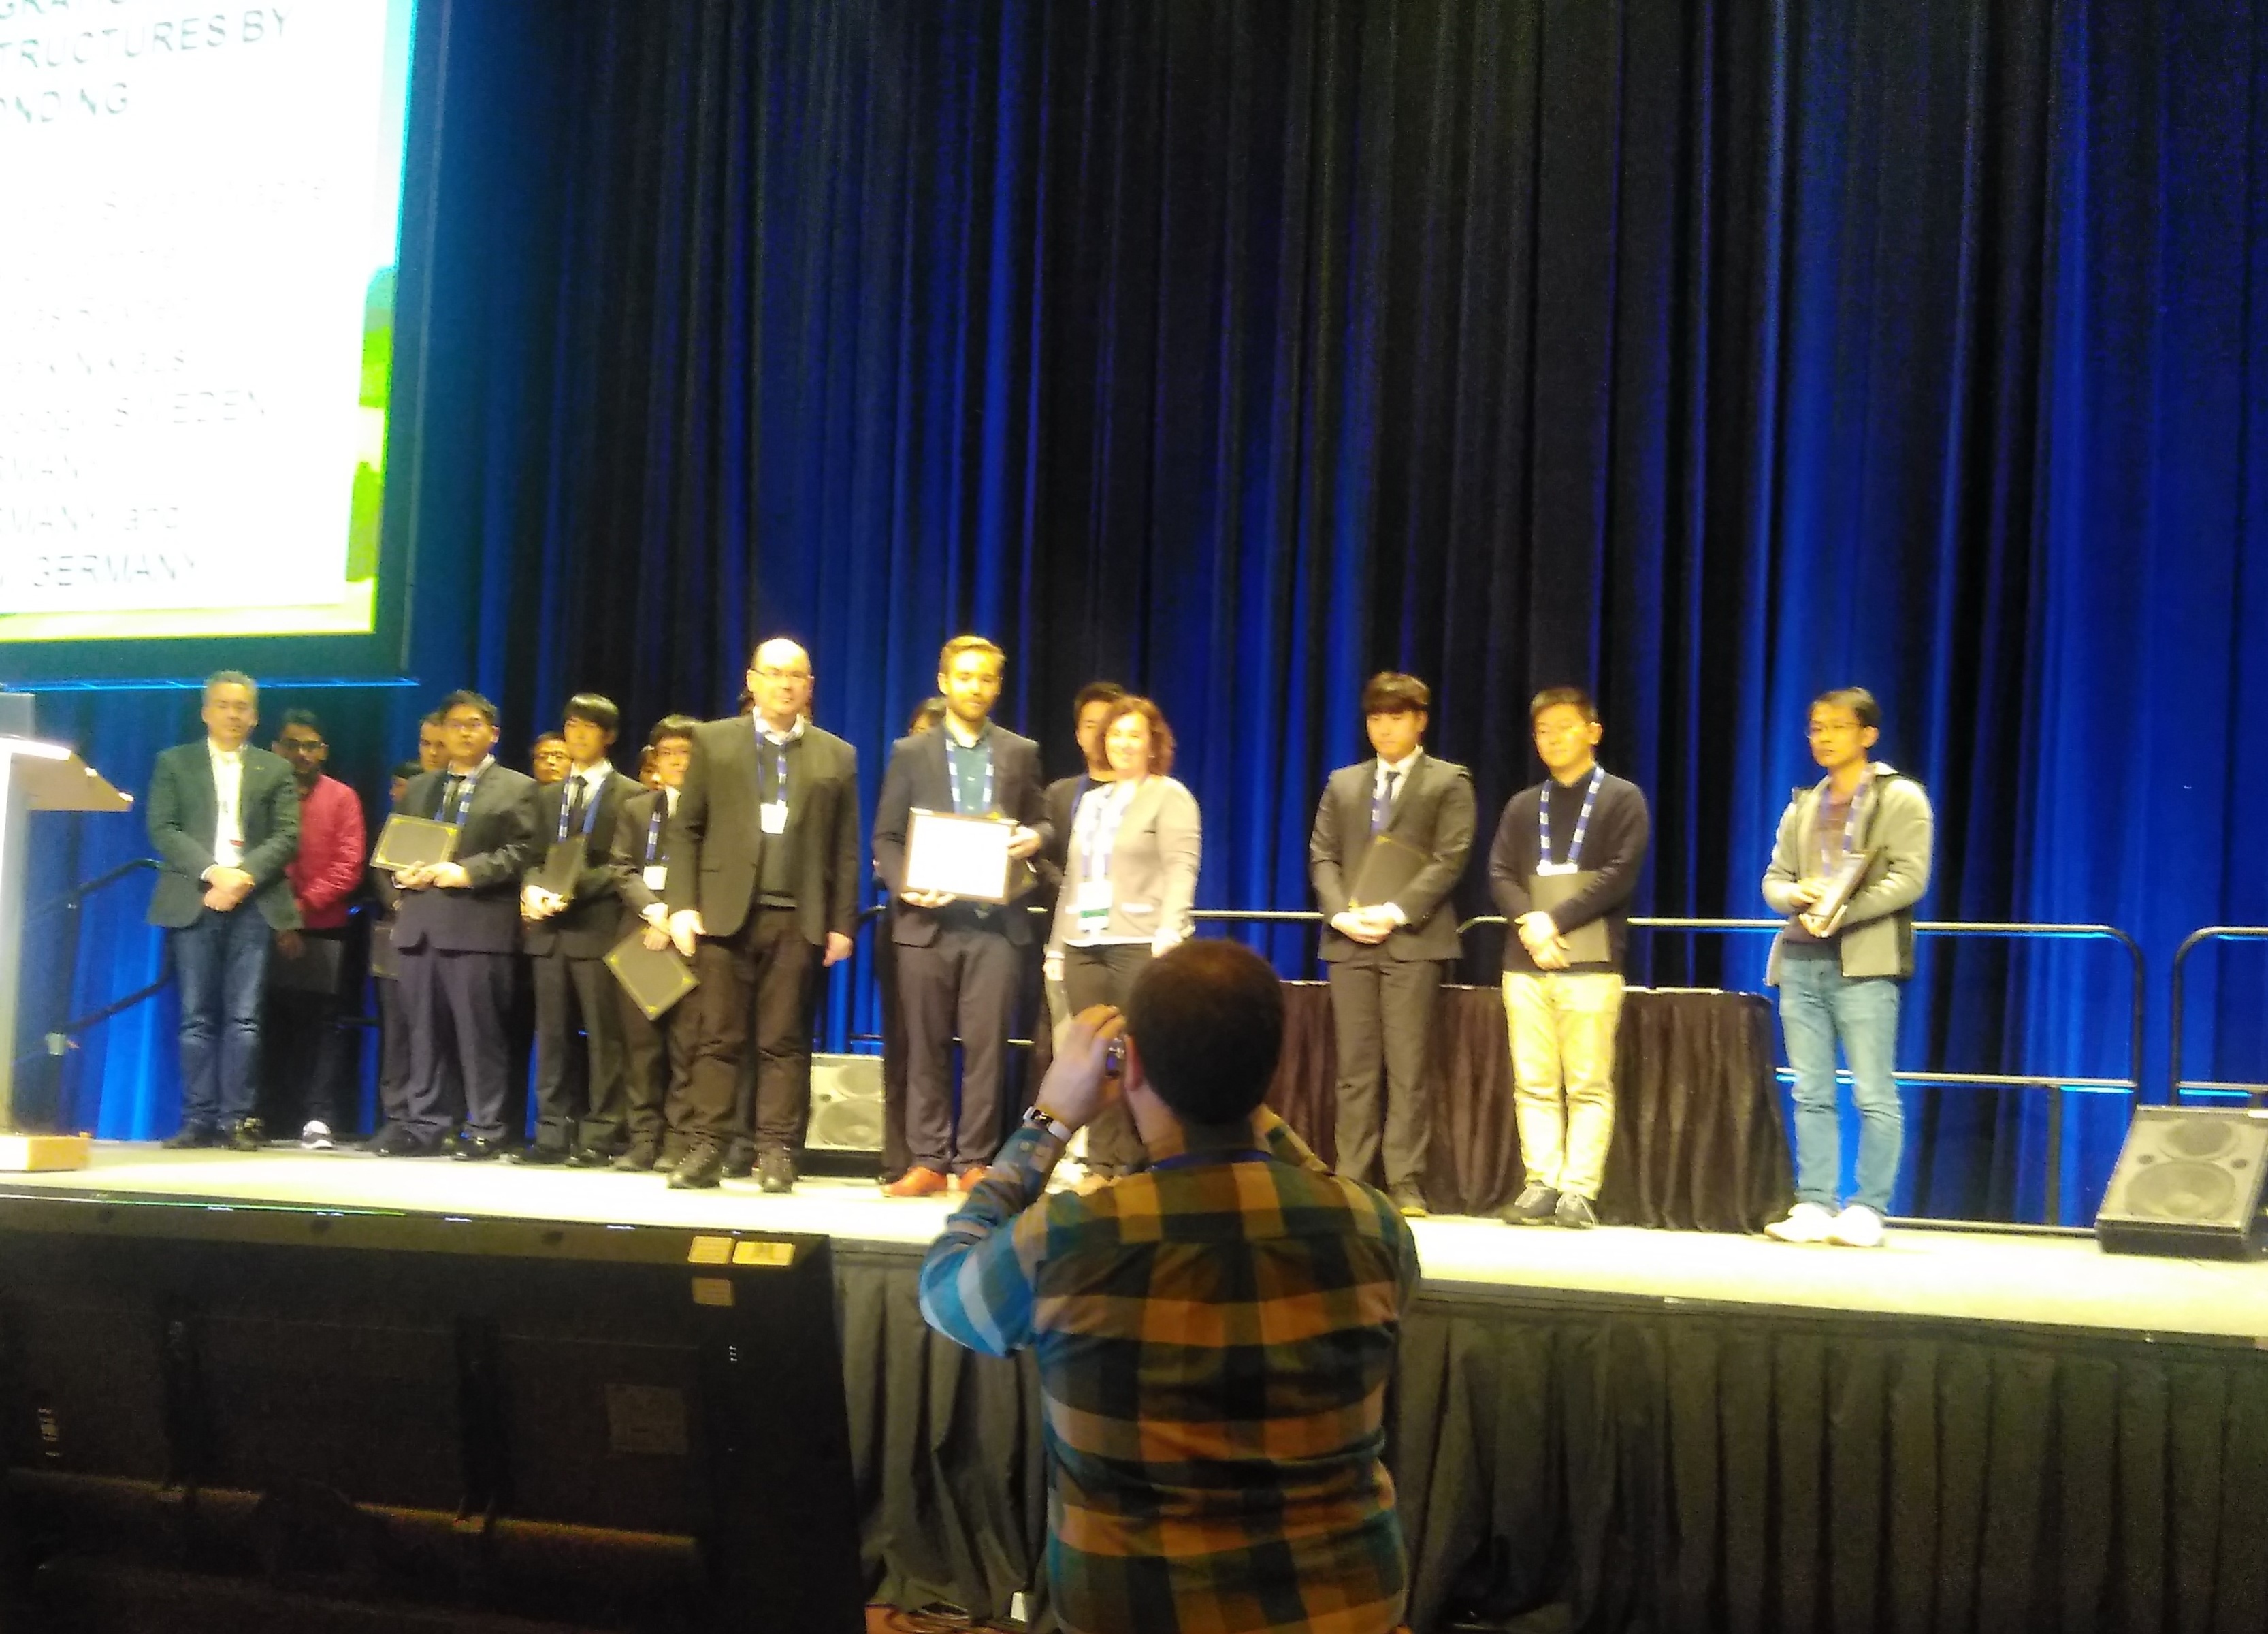 Participants of the award ceremony for best paper receiving a diploma